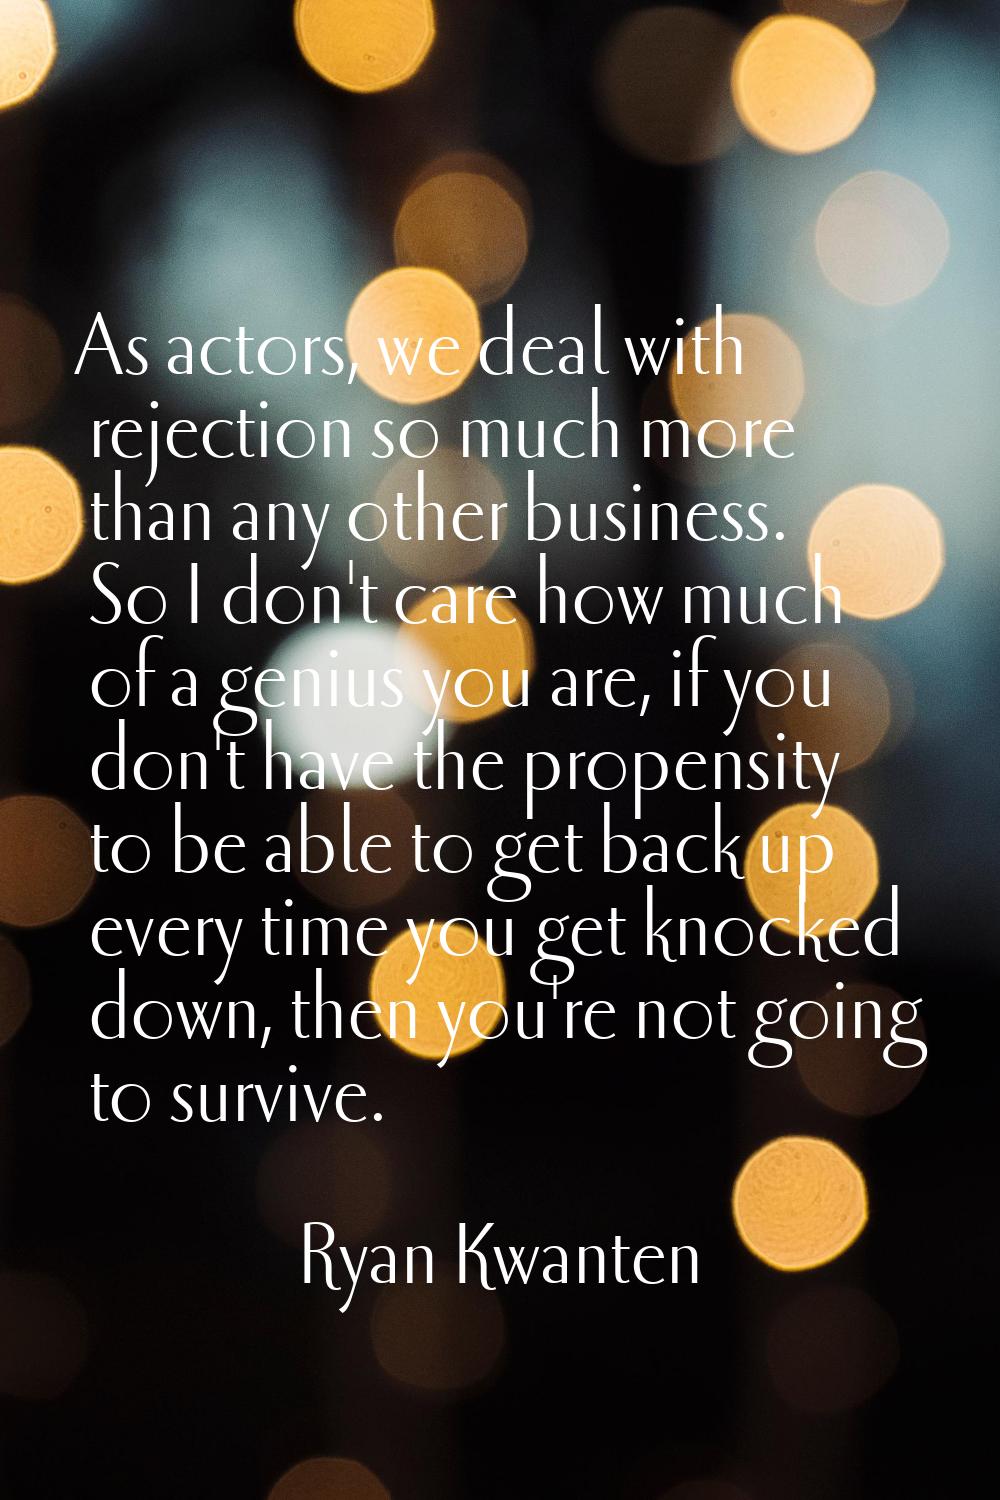 As actors, we deal with rejection so much more than any other business. So I don't care how much of